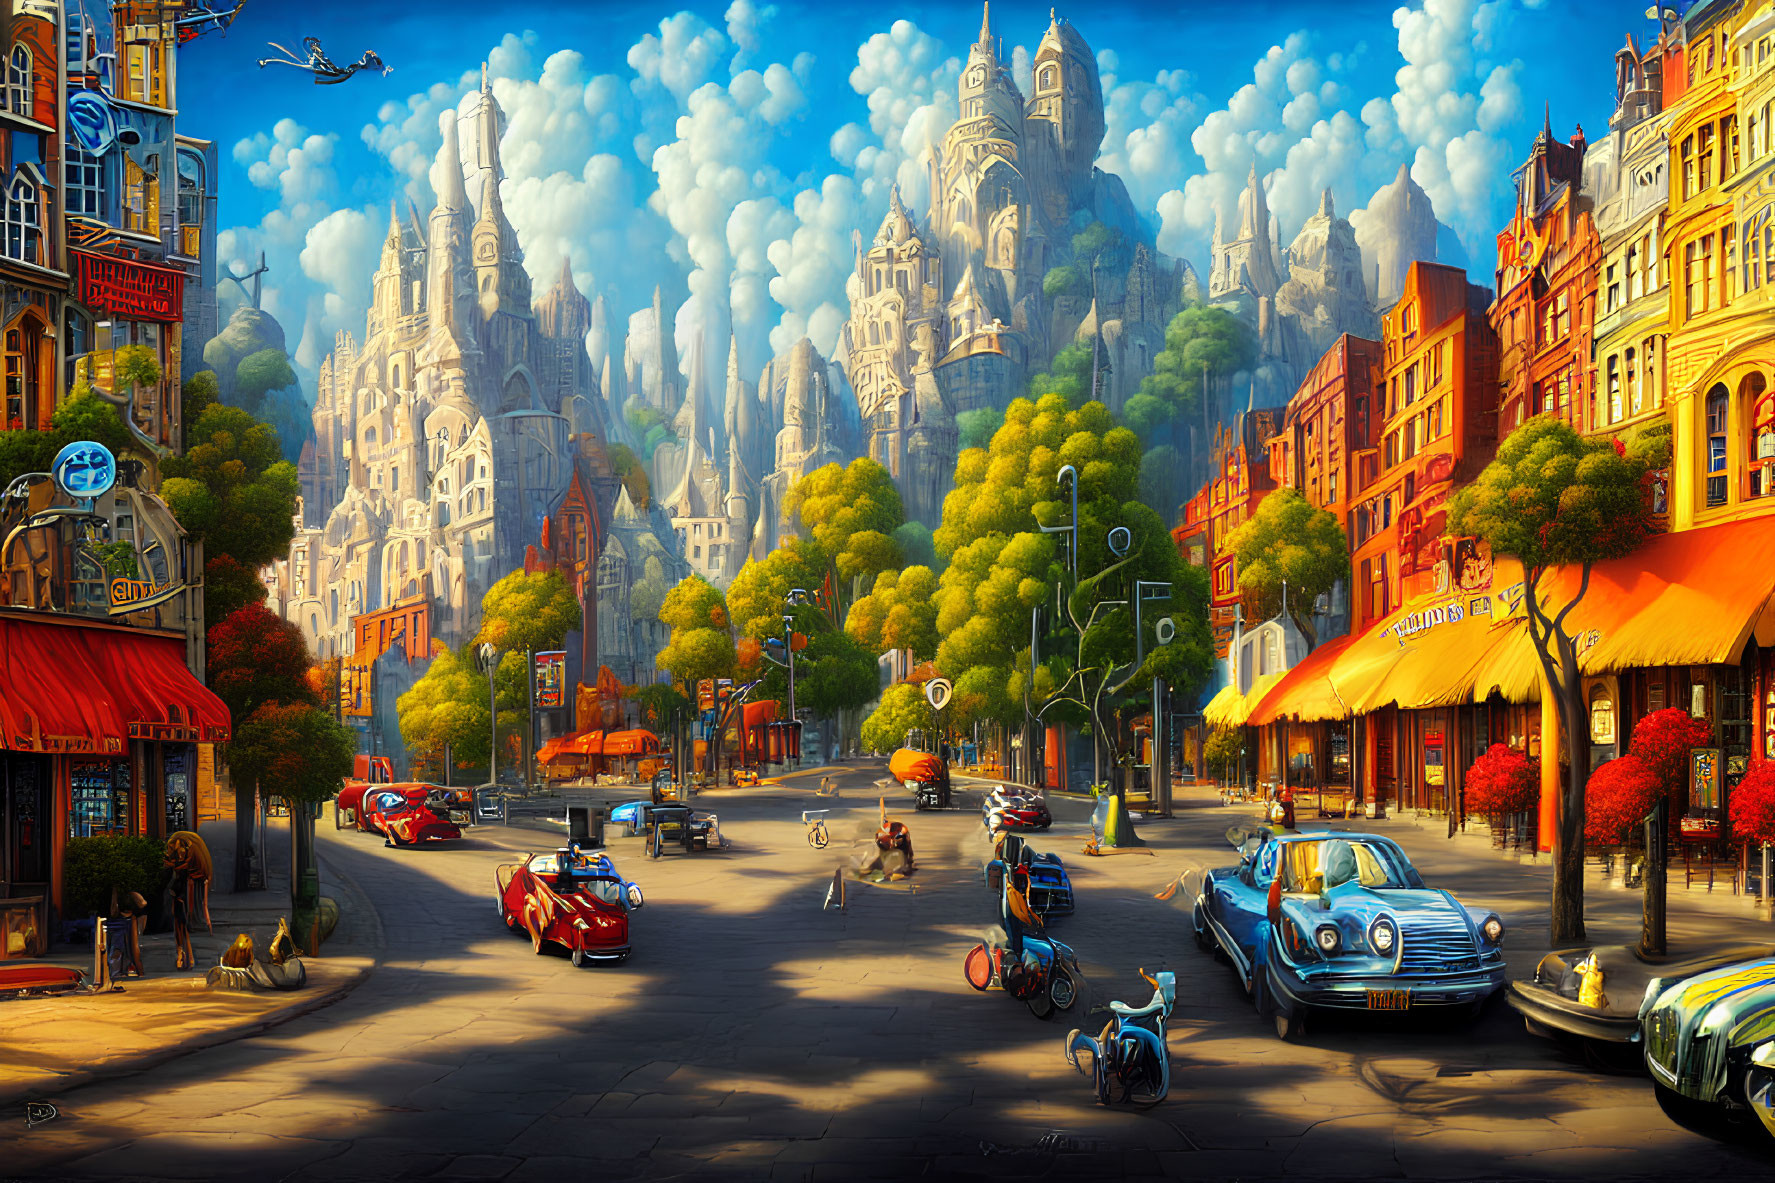 Colorful cityscape with retro cars and pedestrians under a blue sky